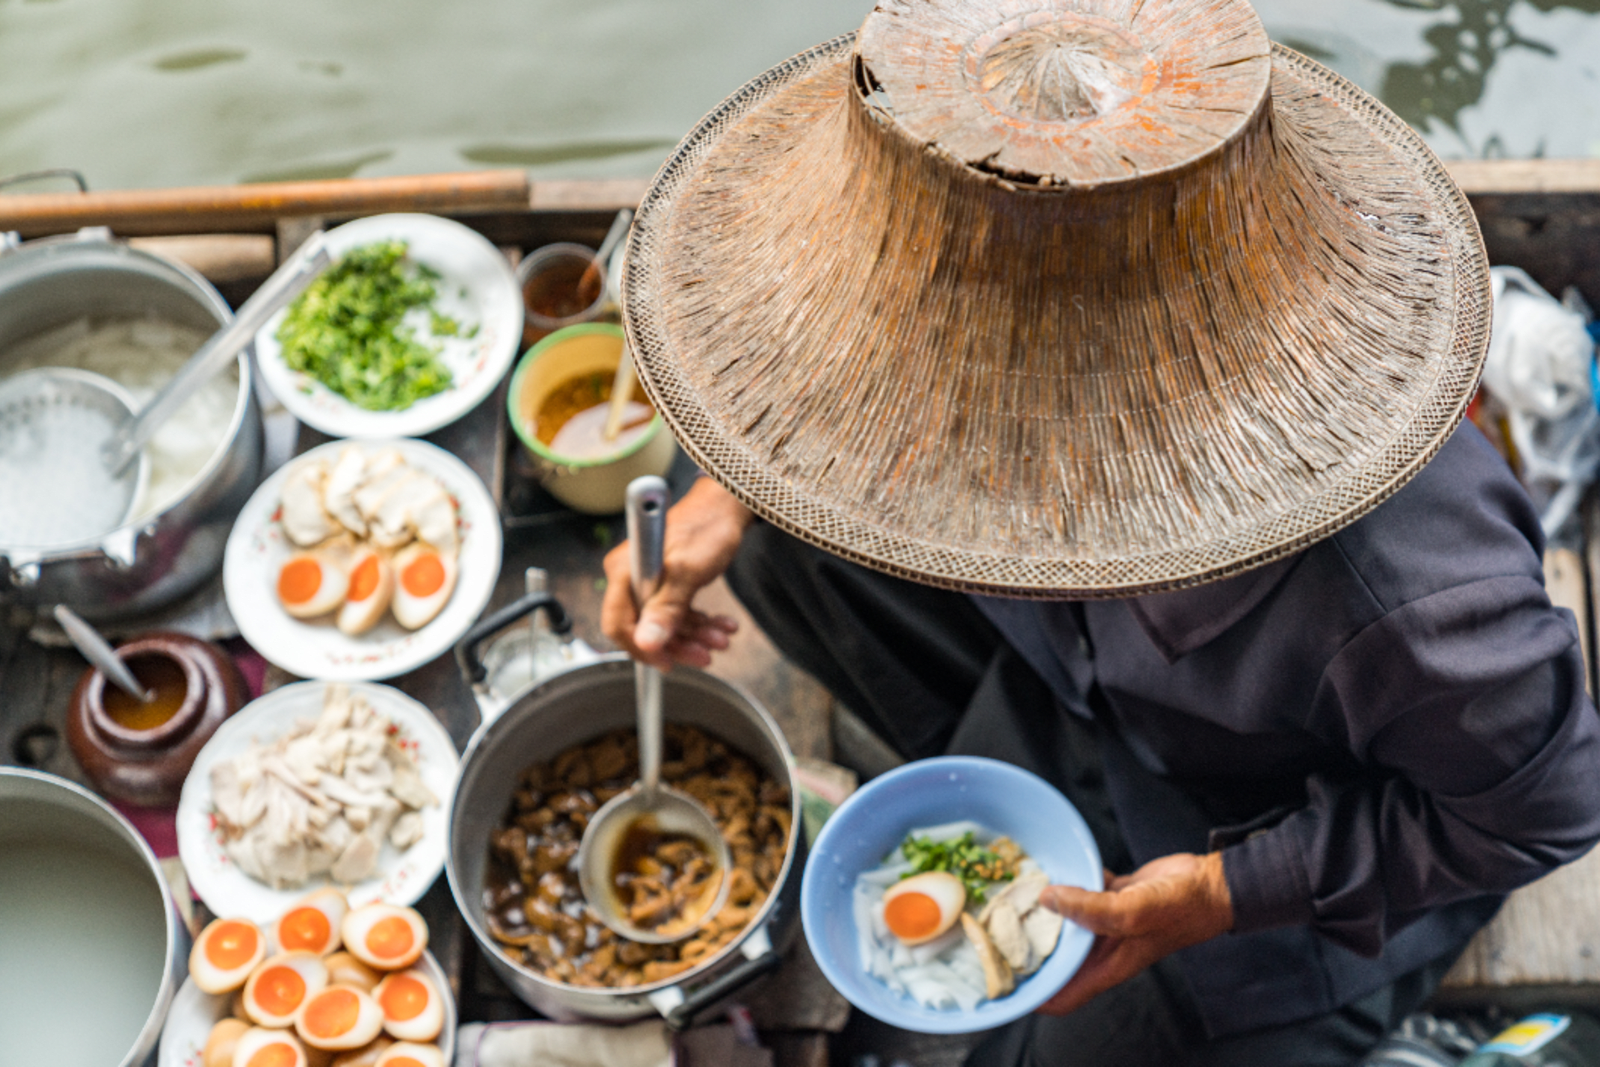 A trip to Thailand would be incomplete without trying food from a floating market